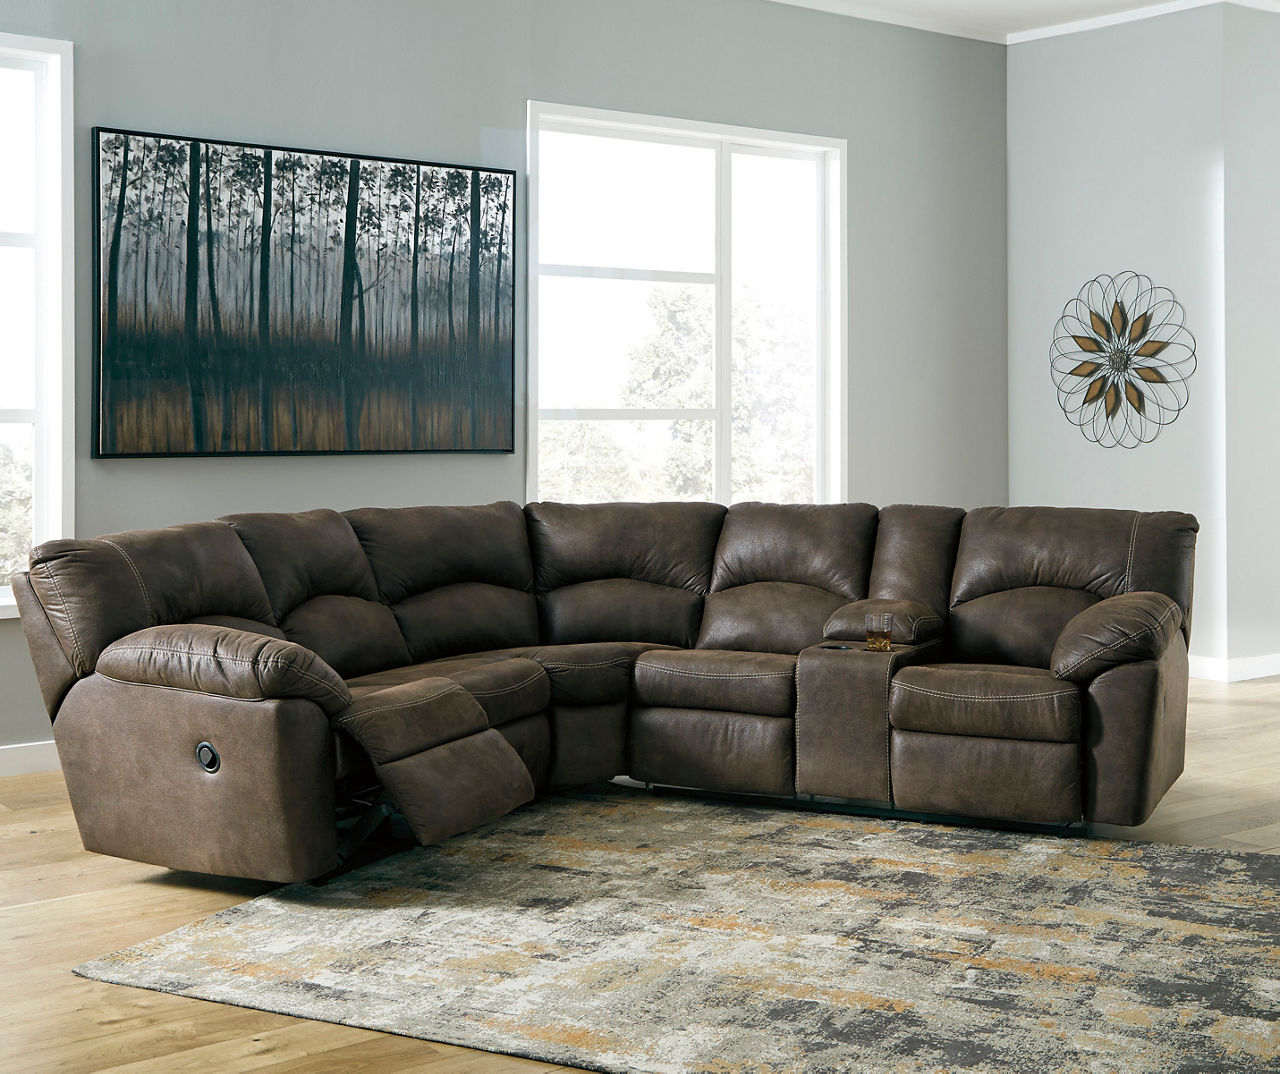 Signature Design By Ashley Tambo Canyon Faux Leather Reclining Sectional